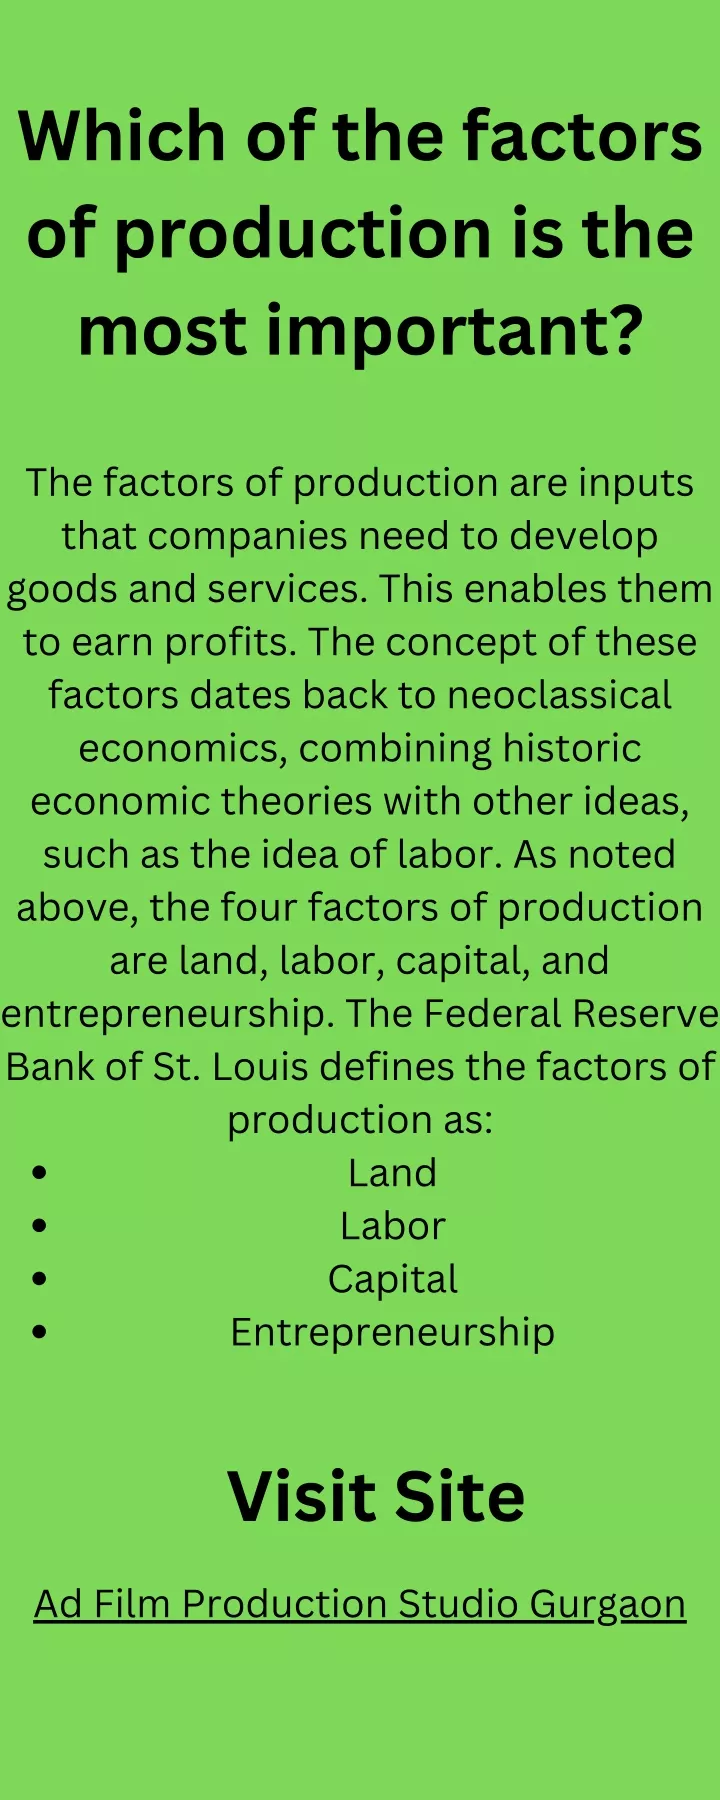 which of the factors of production is the most